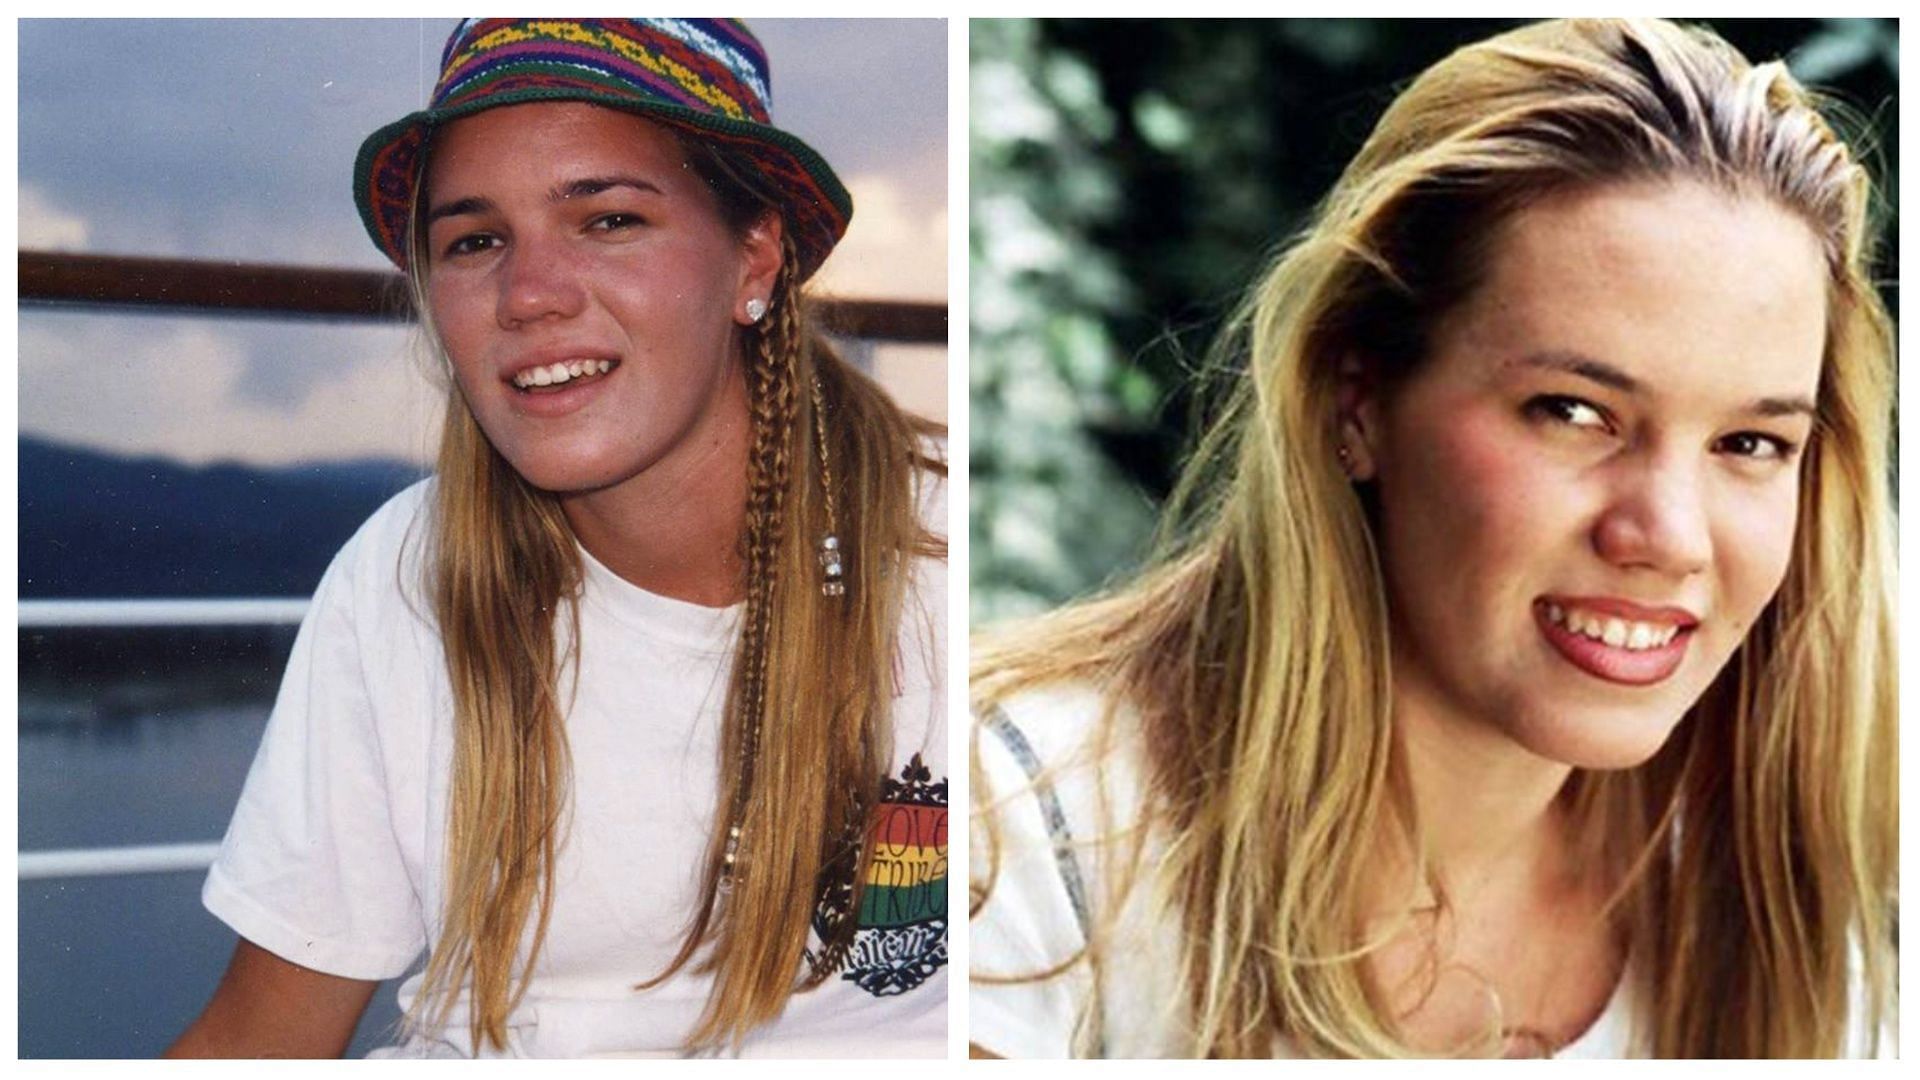 Kristin Smart went missing during Memorial Weekend in 1996 (images via family)